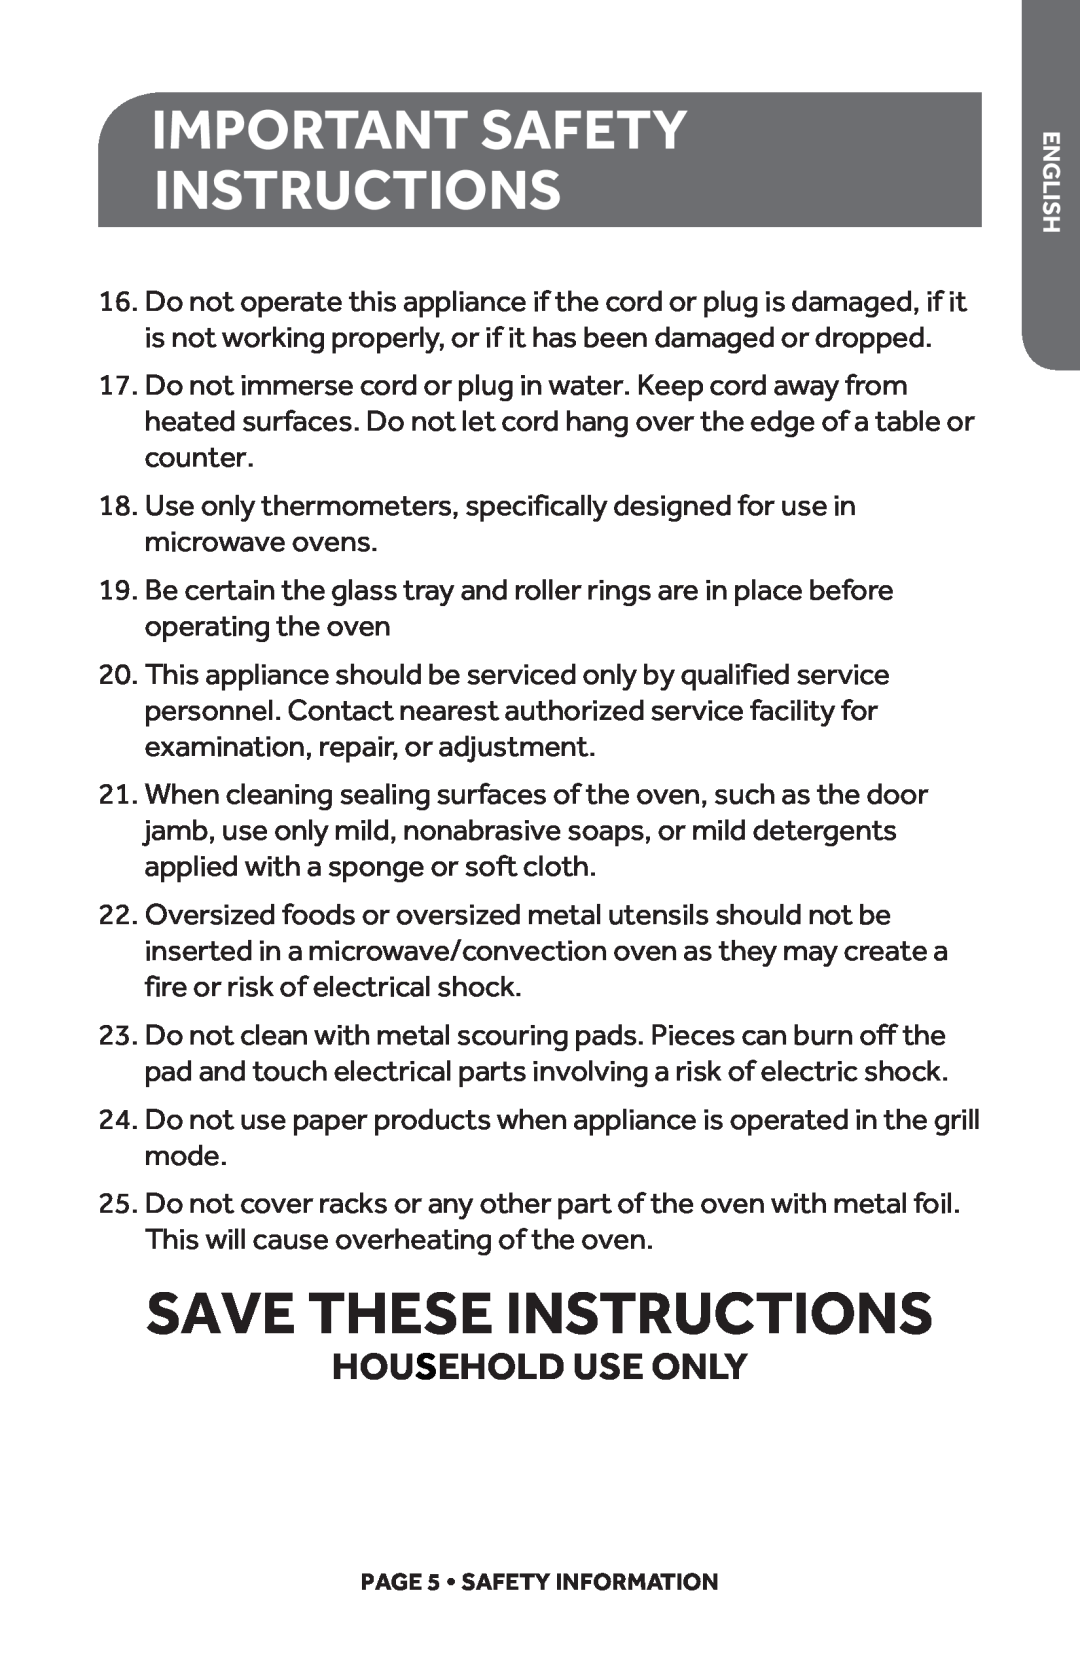 Haier HMC1685SESS user manual Save These Instructions, Household Use Only, important safety instructions 